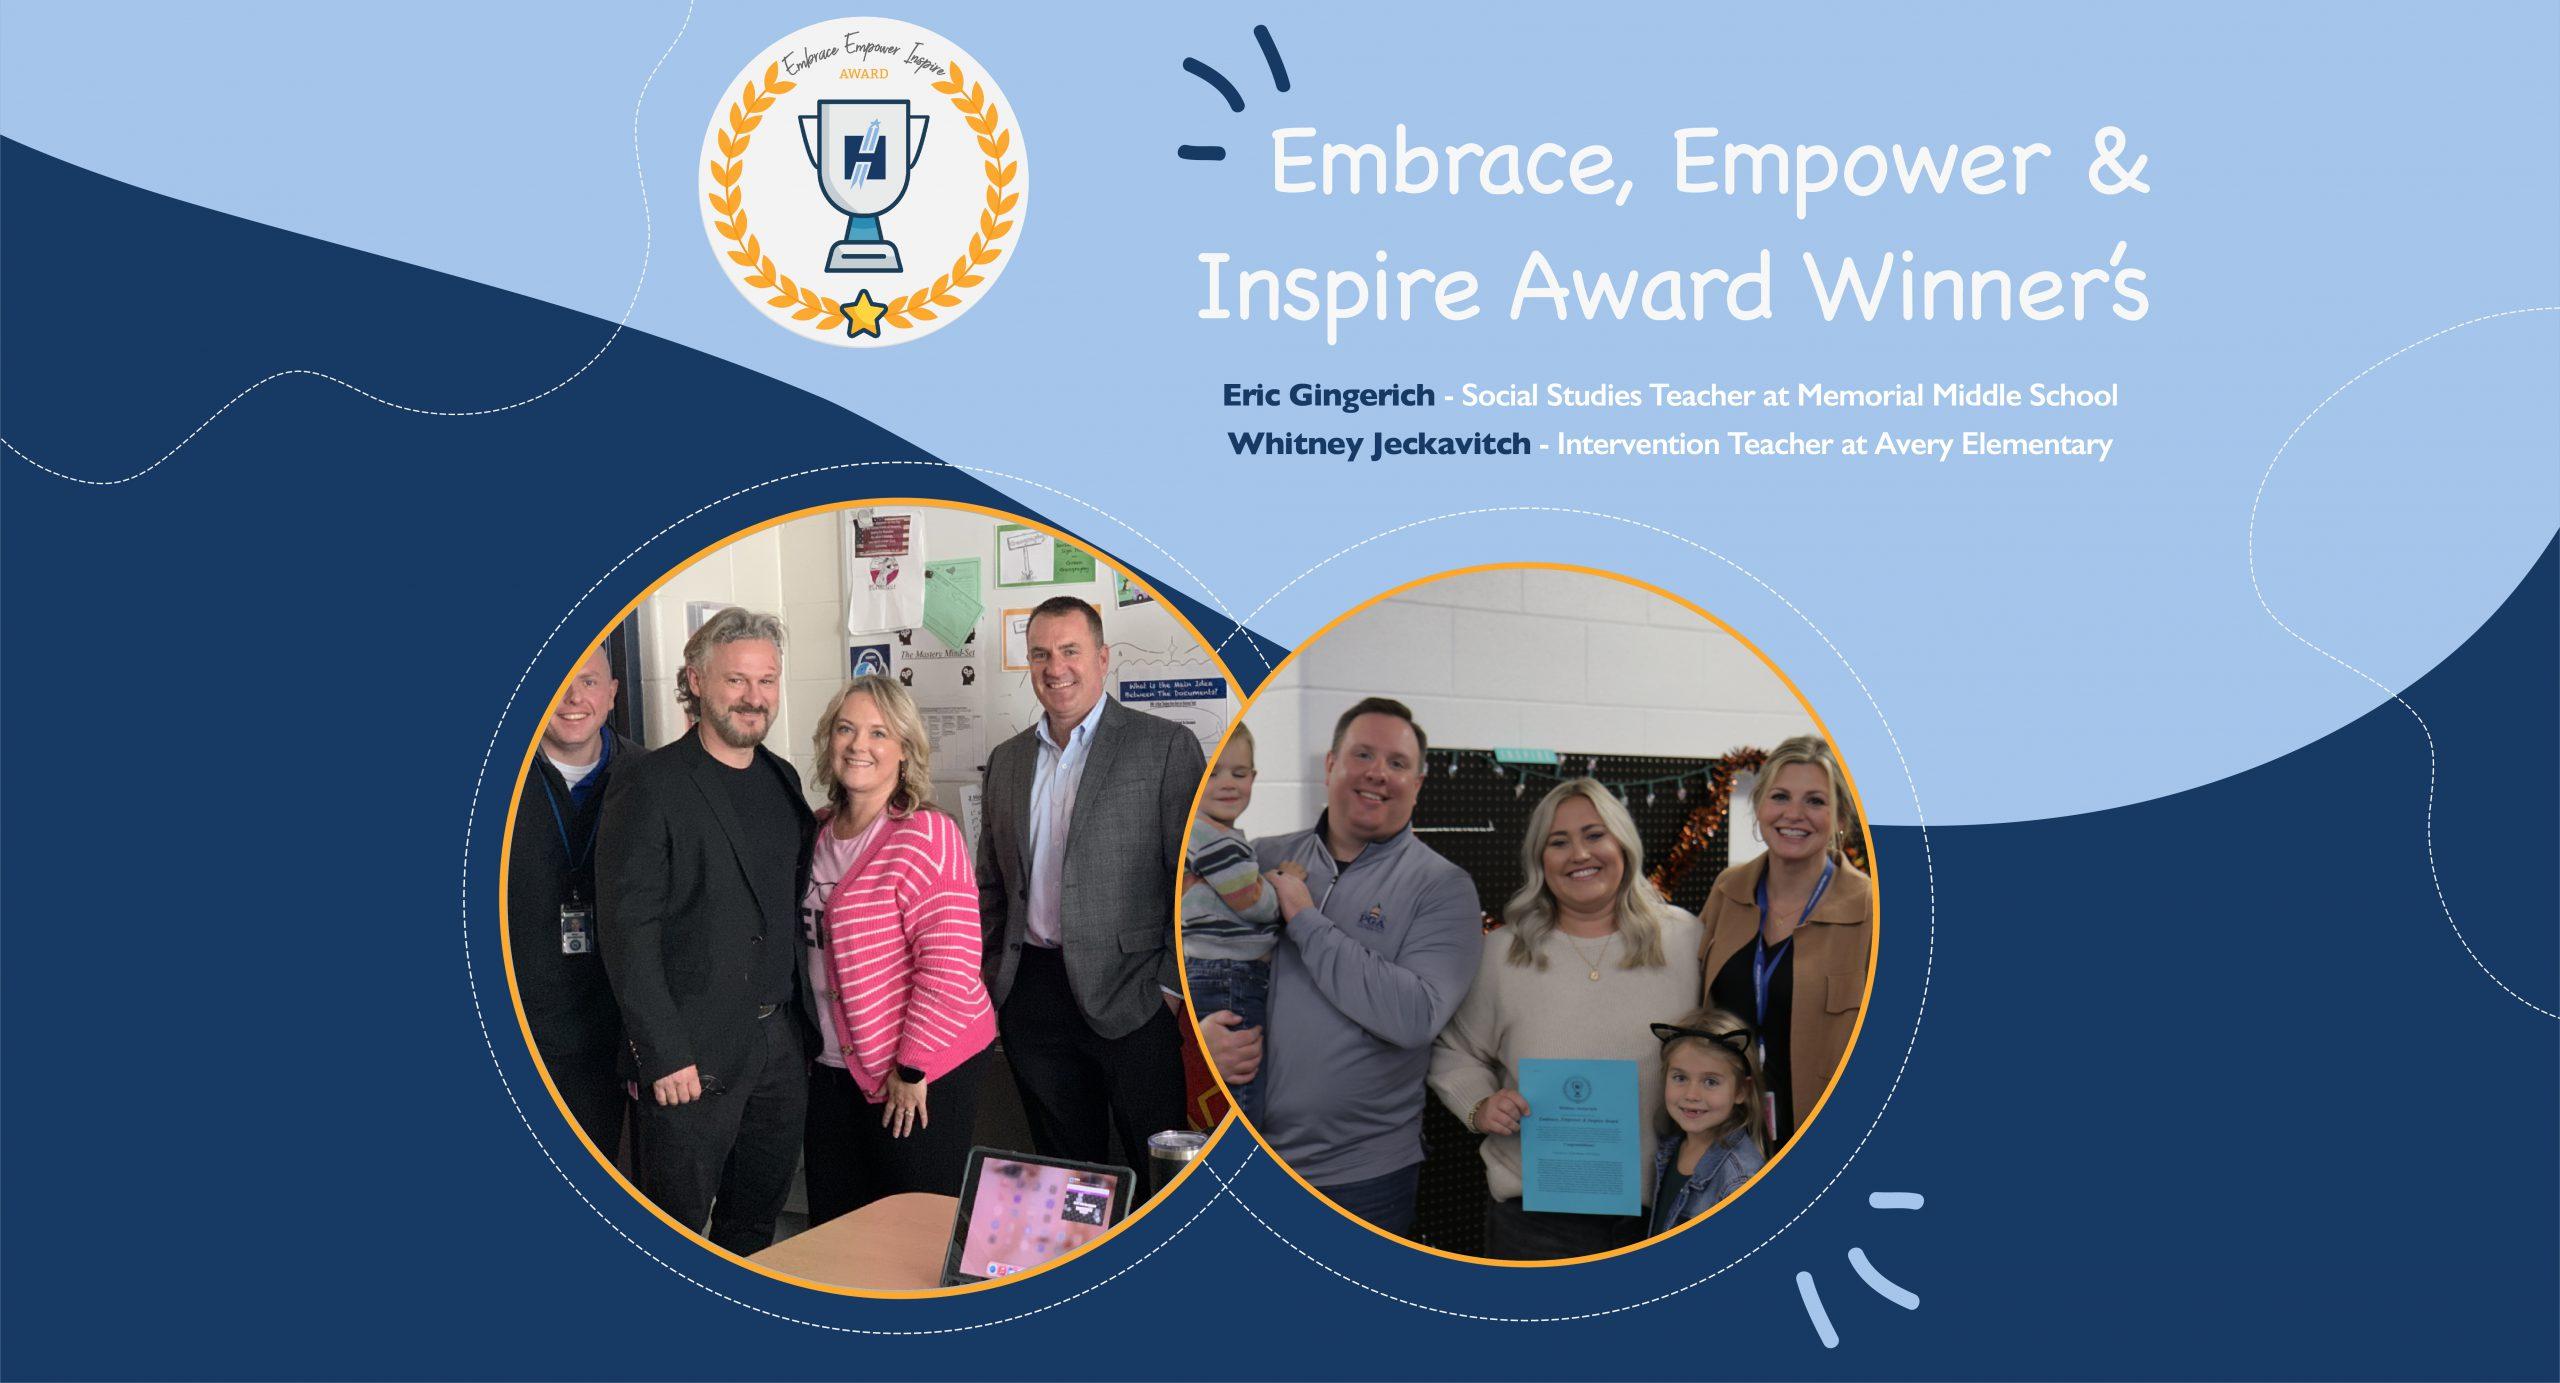 Recipients of the Embrace Empower & Inspire Award